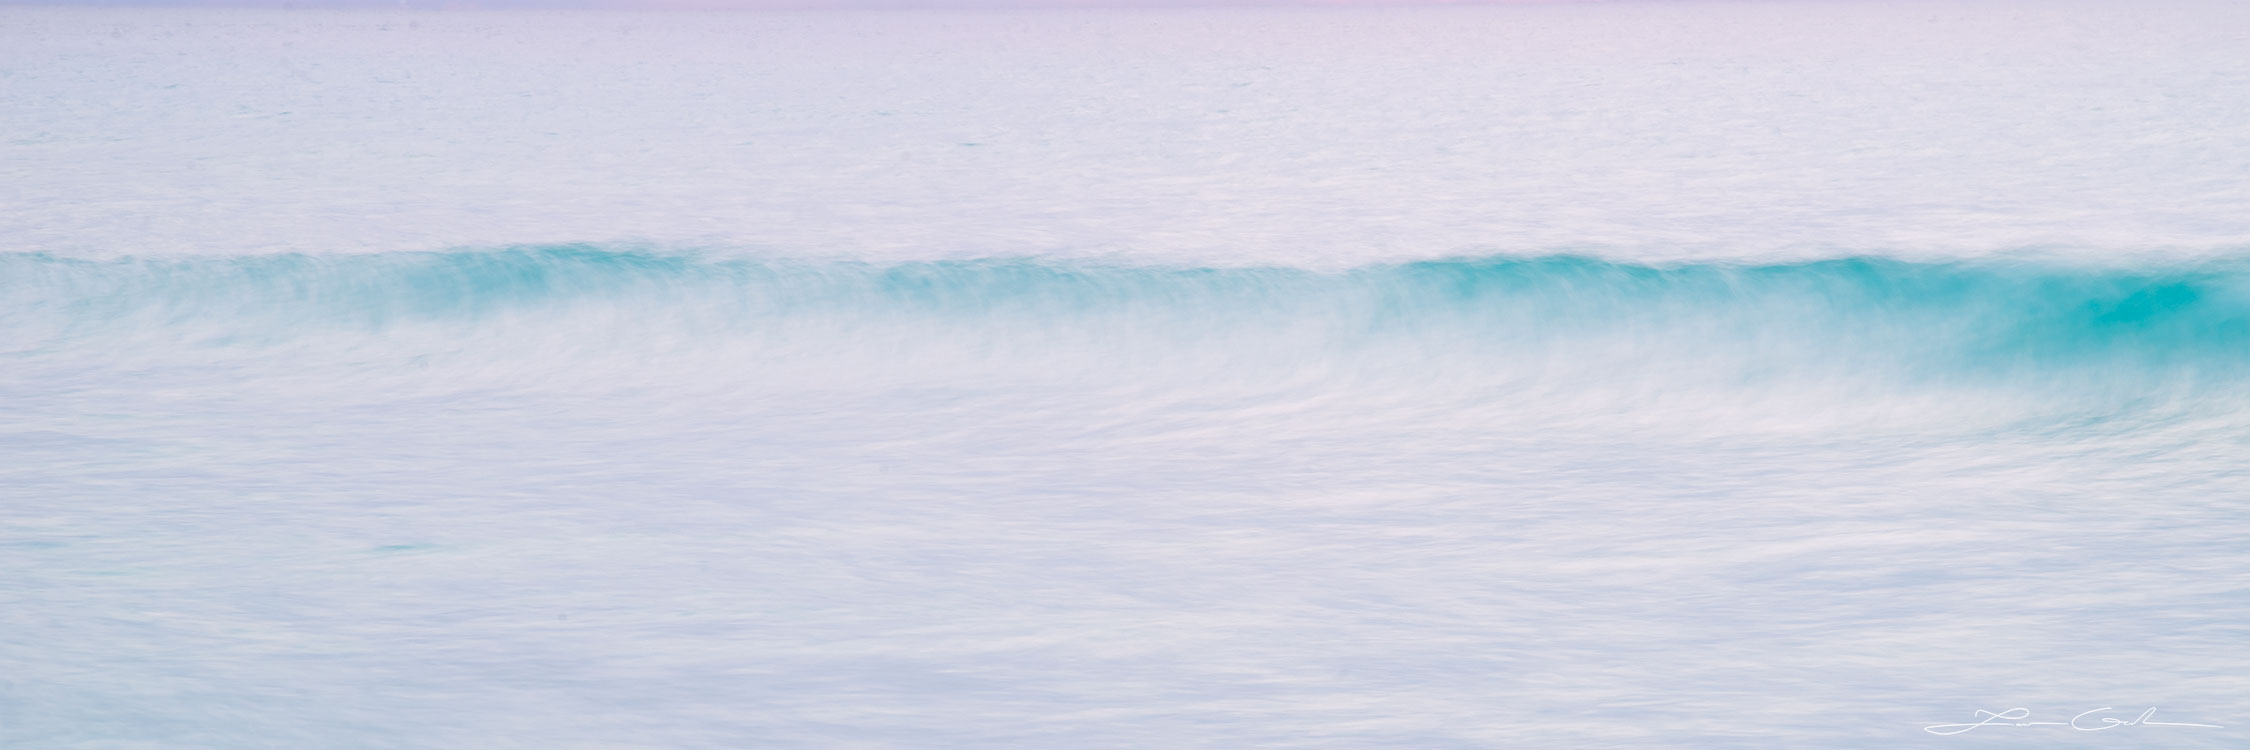 Simple wave abstract panorama with some turquoise color - Gintchin Fine Art